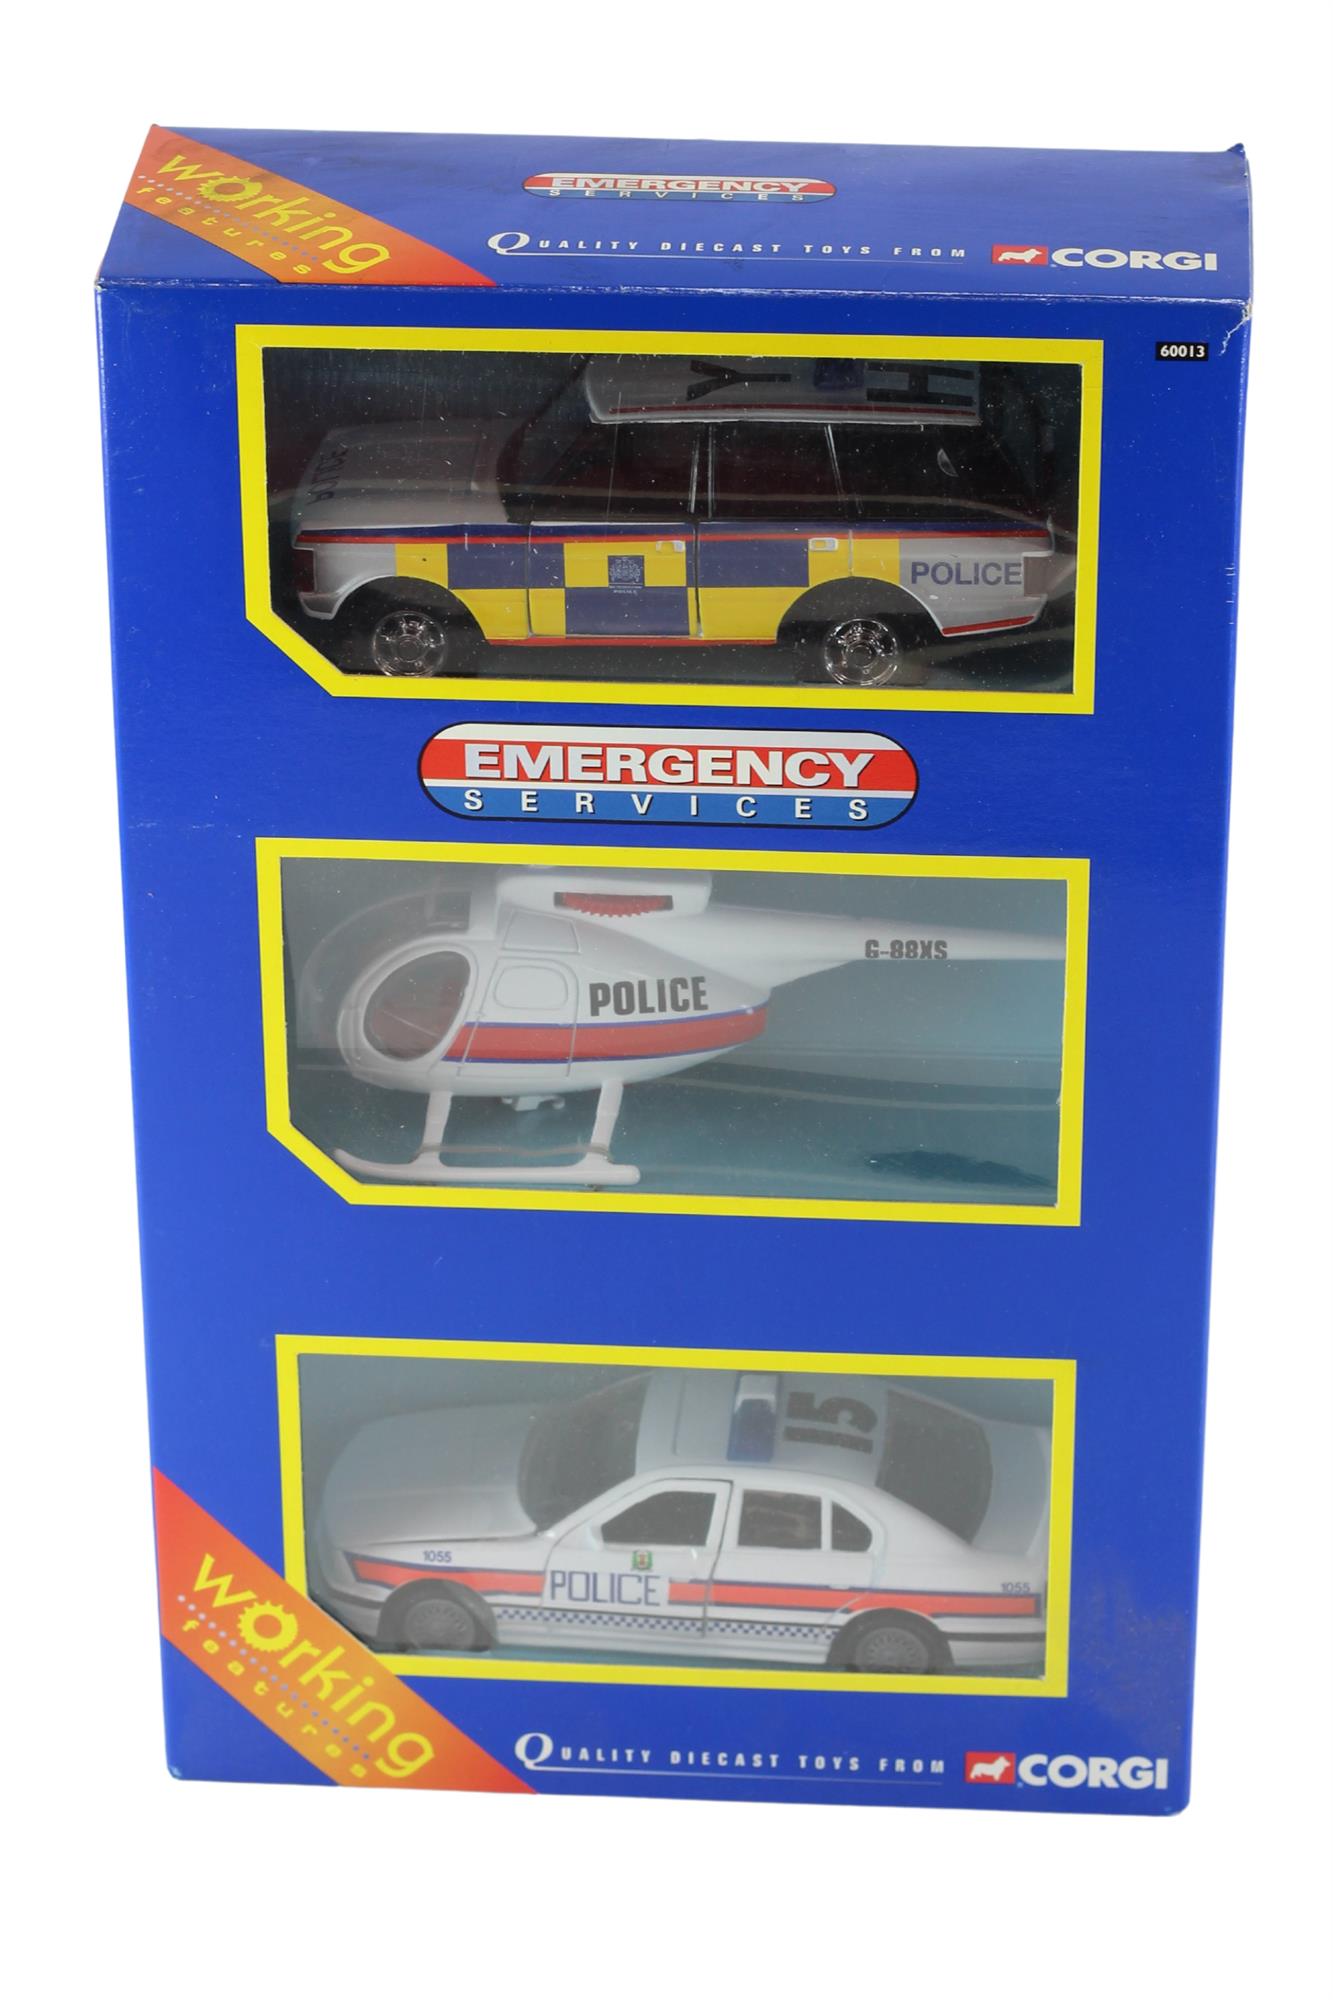 Corgi Models - 1:36 Scale Diecast Pack of 3 Emergency Service Vehicles - Police Helicopter, Met Police Rover & 525 Hampshire Police - 60013 - Toptoys2u